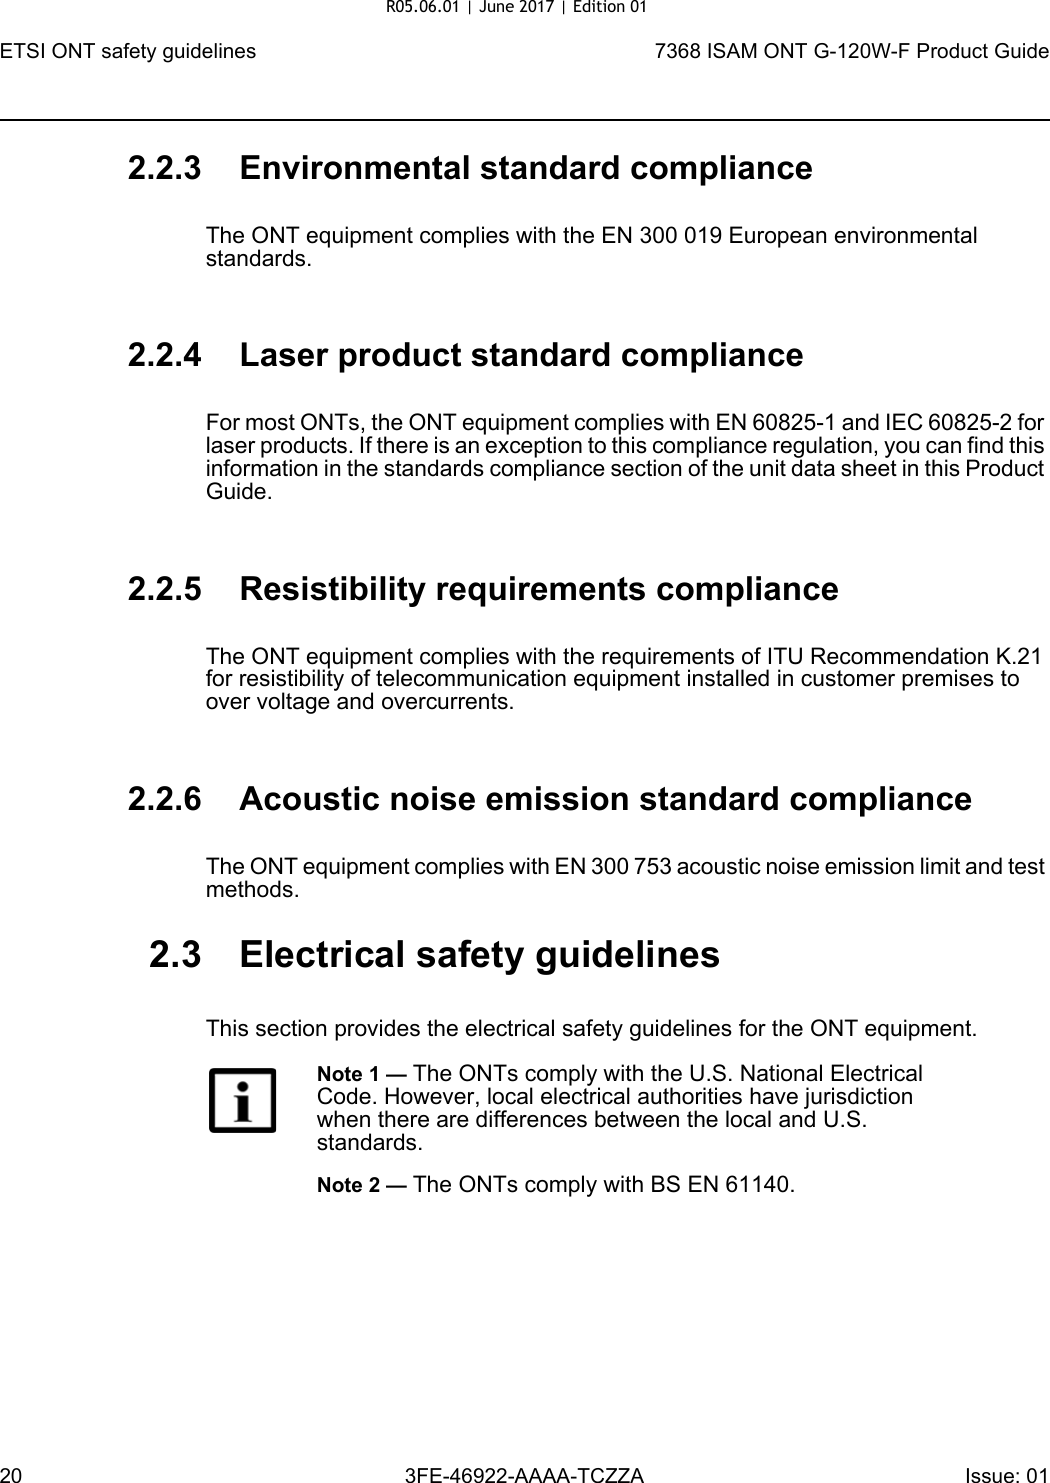 ETSI ONT safety guidelines207368 ISAM ONT G-120W-F Product Guide3FE-46922-AAAA-TCZZA Issue: 01 2.2.3 Environmental standard complianceThe ONT equipment complies with the EN 300 019 European environmental standards.2.2.4 Laser product standard complianceFor most ONTs, the ONT equipment complies with EN 60825-1 and IEC 60825-2 for laser products. If there is an exception to this compliance regulation, you can find this information in the standards compliance section of the unit data sheet in this Product Guide.2.2.5 Resistibility requirements complianceThe ONT equipment complies with the requirements of ITU Recommendation K.21 for resistibility of telecommunication equipment installed in customer premises to over voltage and overcurrents.2.2.6 Acoustic noise emission standard complianceThe ONT equipment complies with EN 300 753 acoustic noise emission limit and test methods. 2.3 Electrical safety guidelinesThis section provides the electrical safety guidelines for the ONT equipment.Note 1 — The ONTs comply with the U.S. National Electrical Code. However, local electrical authorities have jurisdiction when there are differences between the local and U.S. standards.Note 2 — The ONTs comply with BS EN 61140.R05.06.01 | June 2017 | Edition 01 